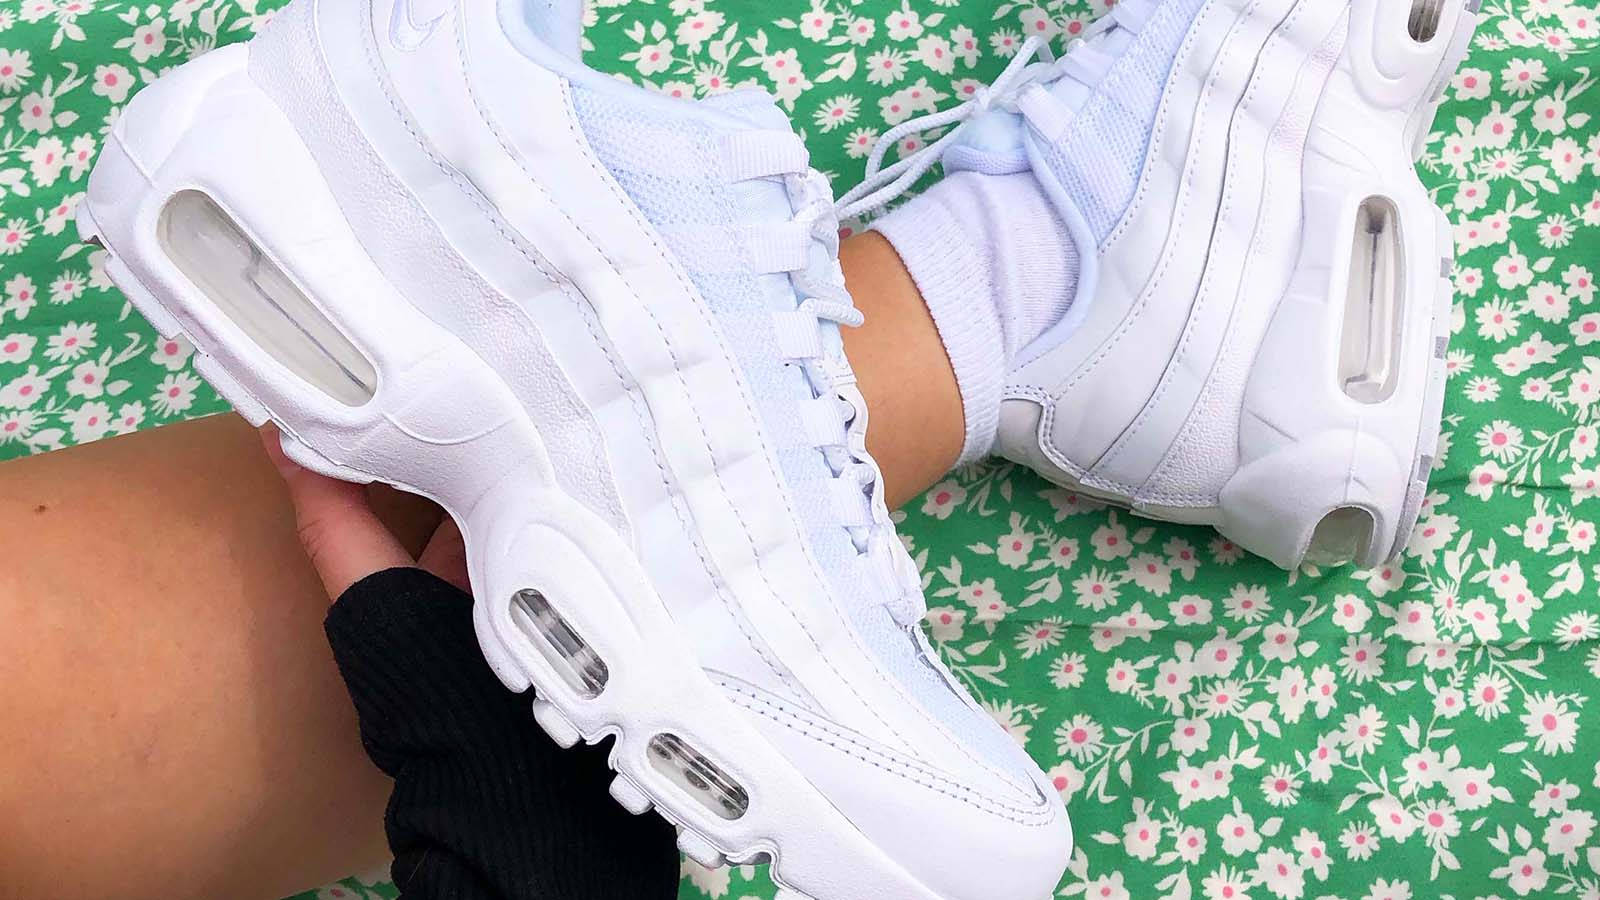 gall bladder grapes compensate How Does the Nike Air Max 95 Fit and is it True to Size? | The Sole Supplier